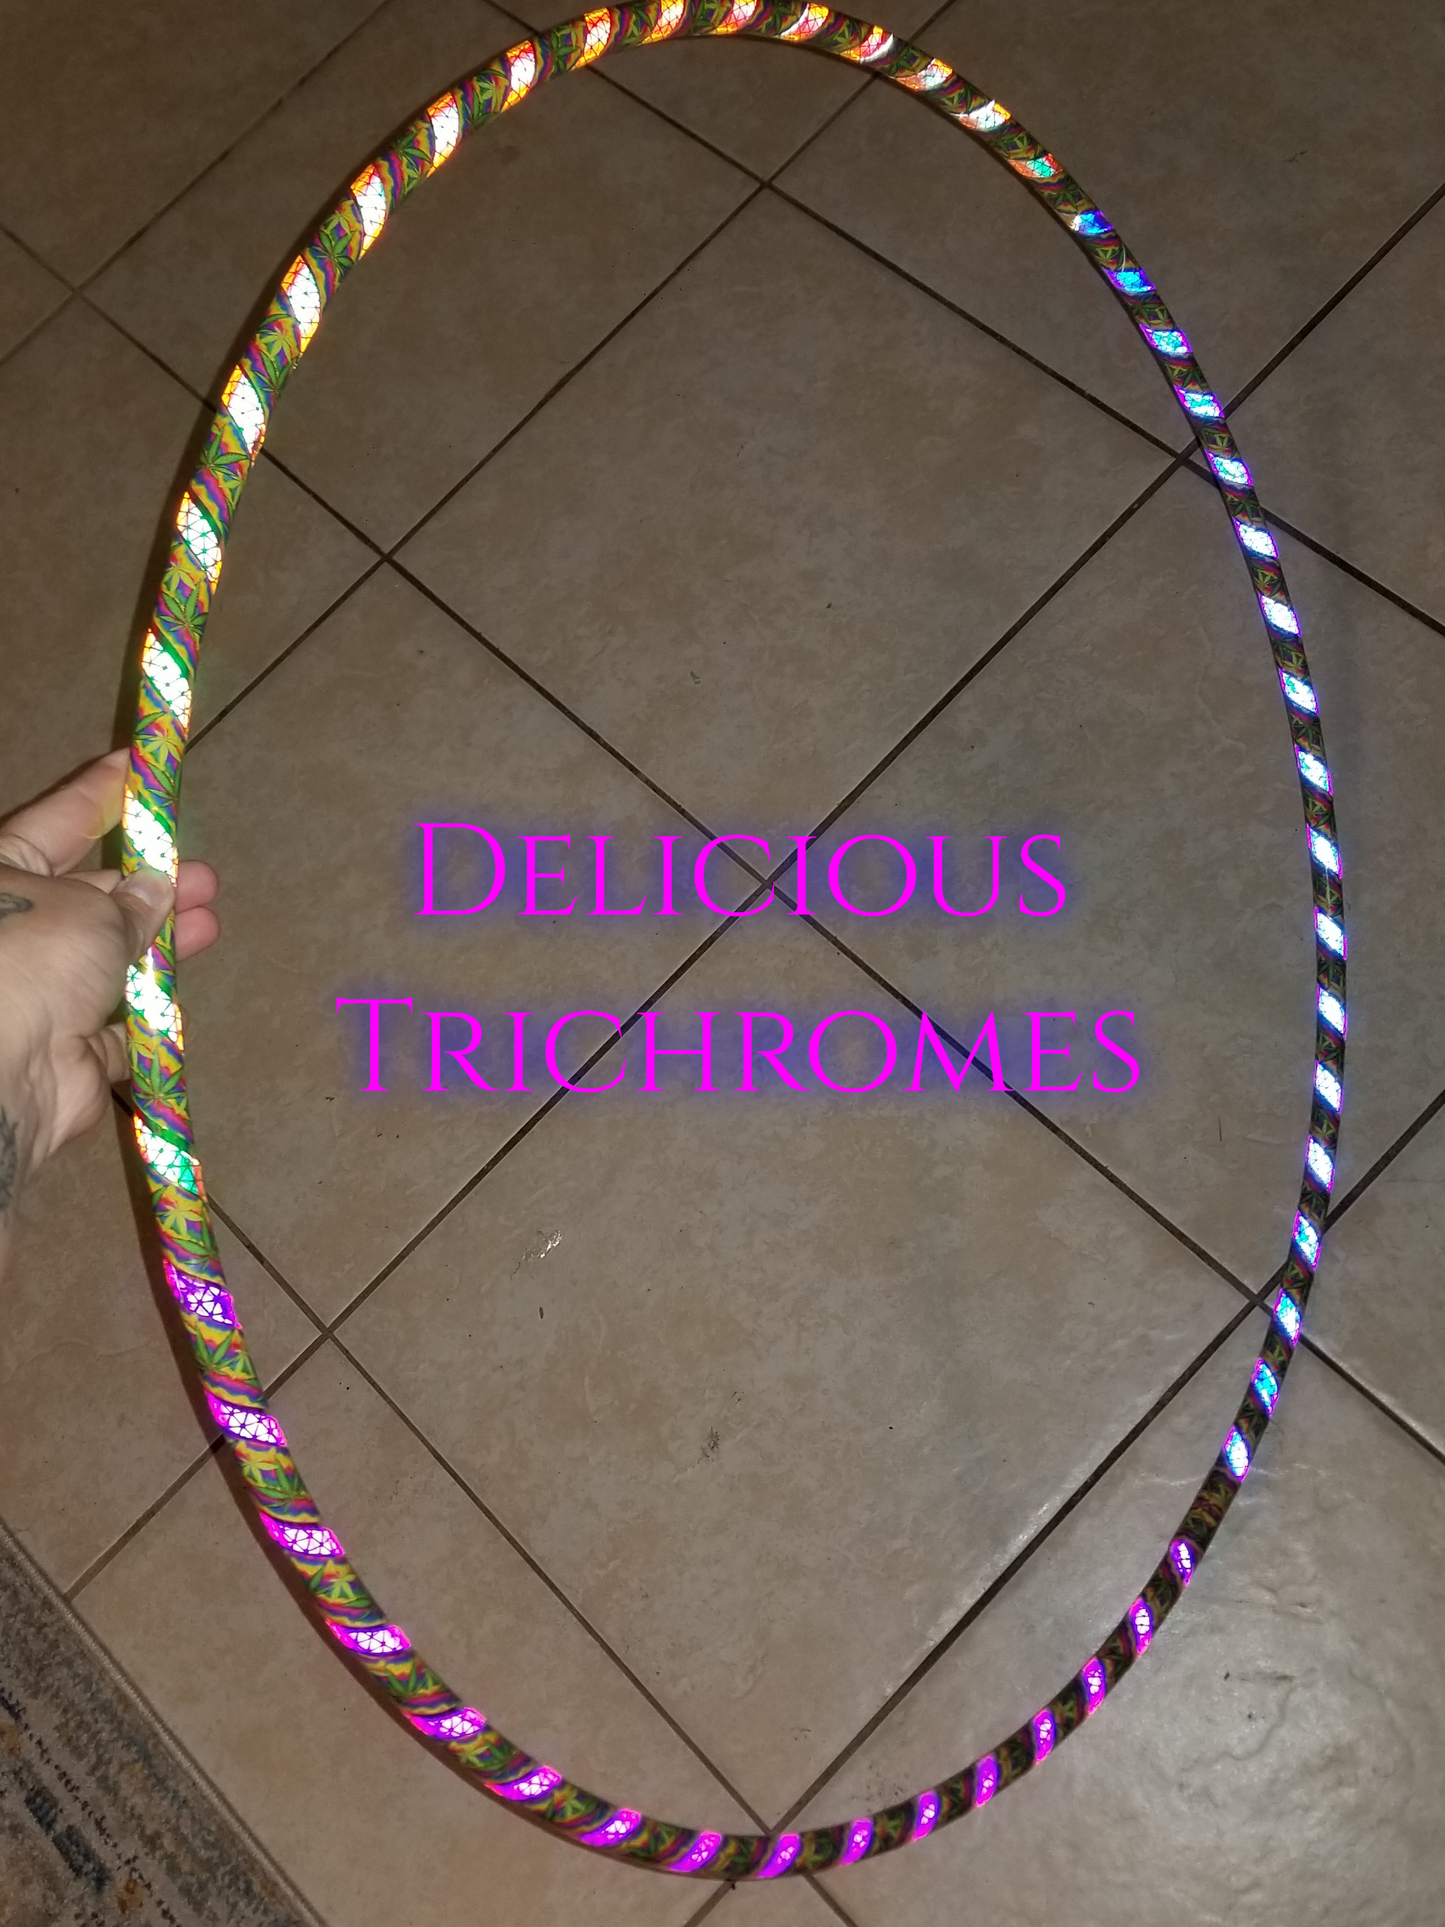 Delicious Trichromes Reflective Taped Hoop